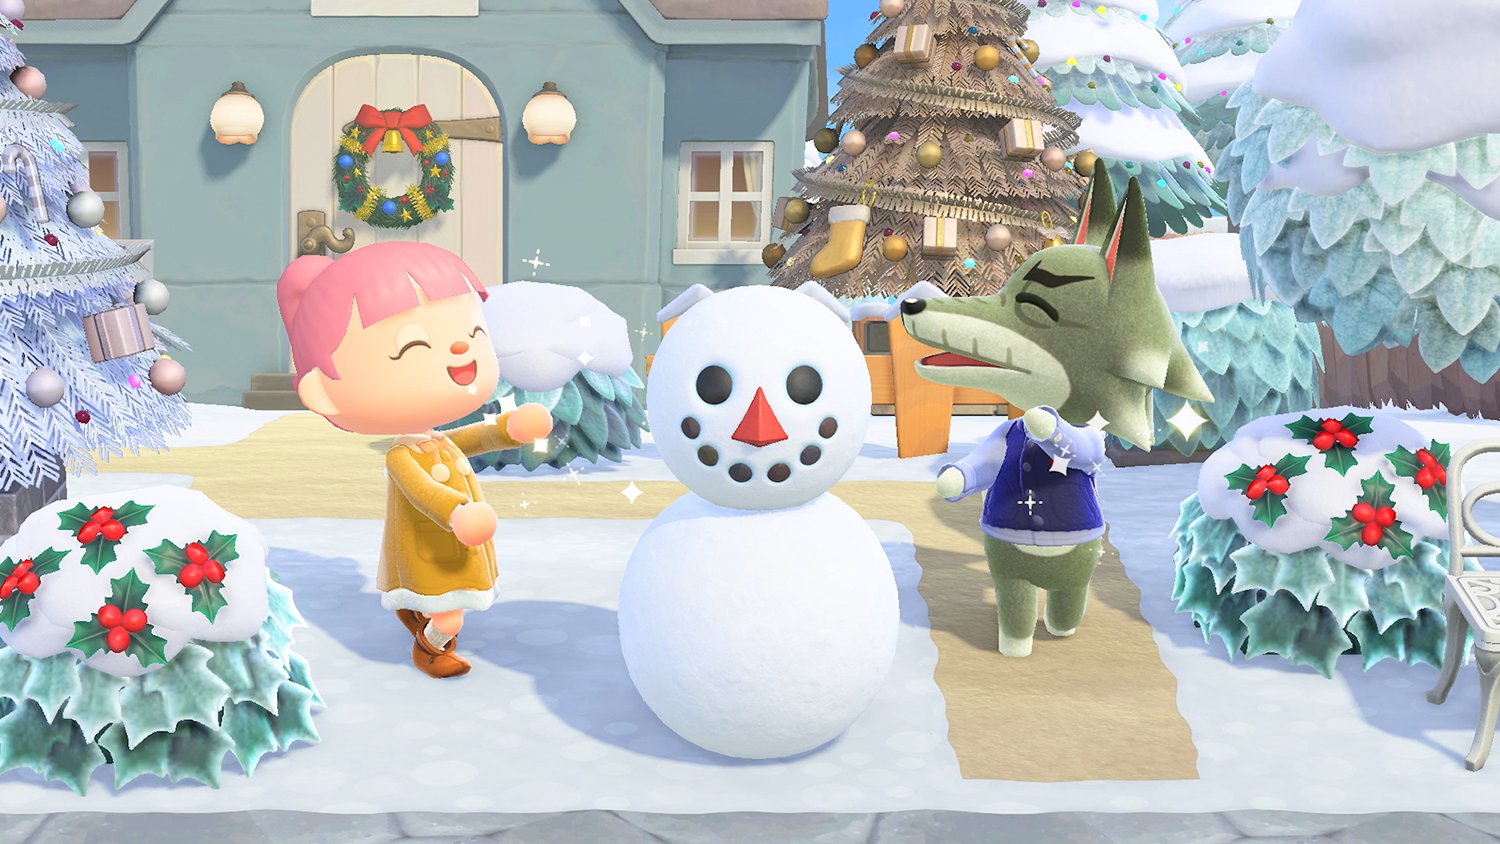 A perfect snowboy in Animal Crossing New Horizons